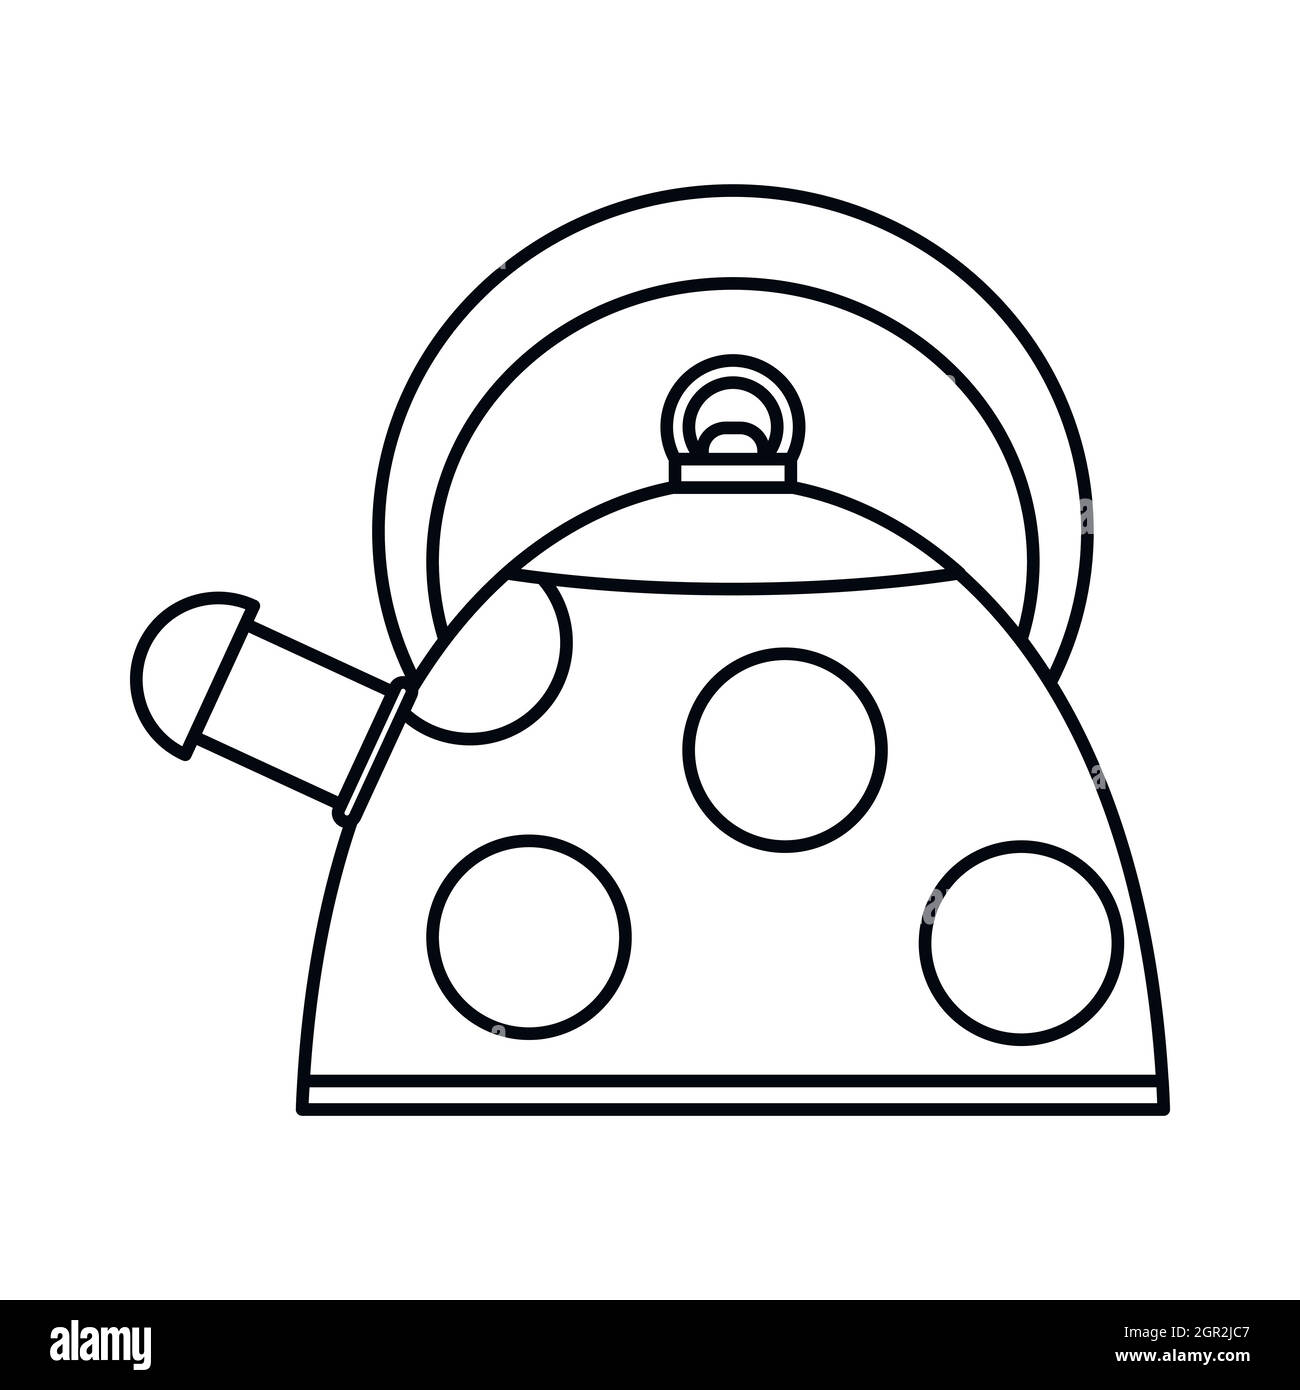 Kettle icon, outline style Stock Vector